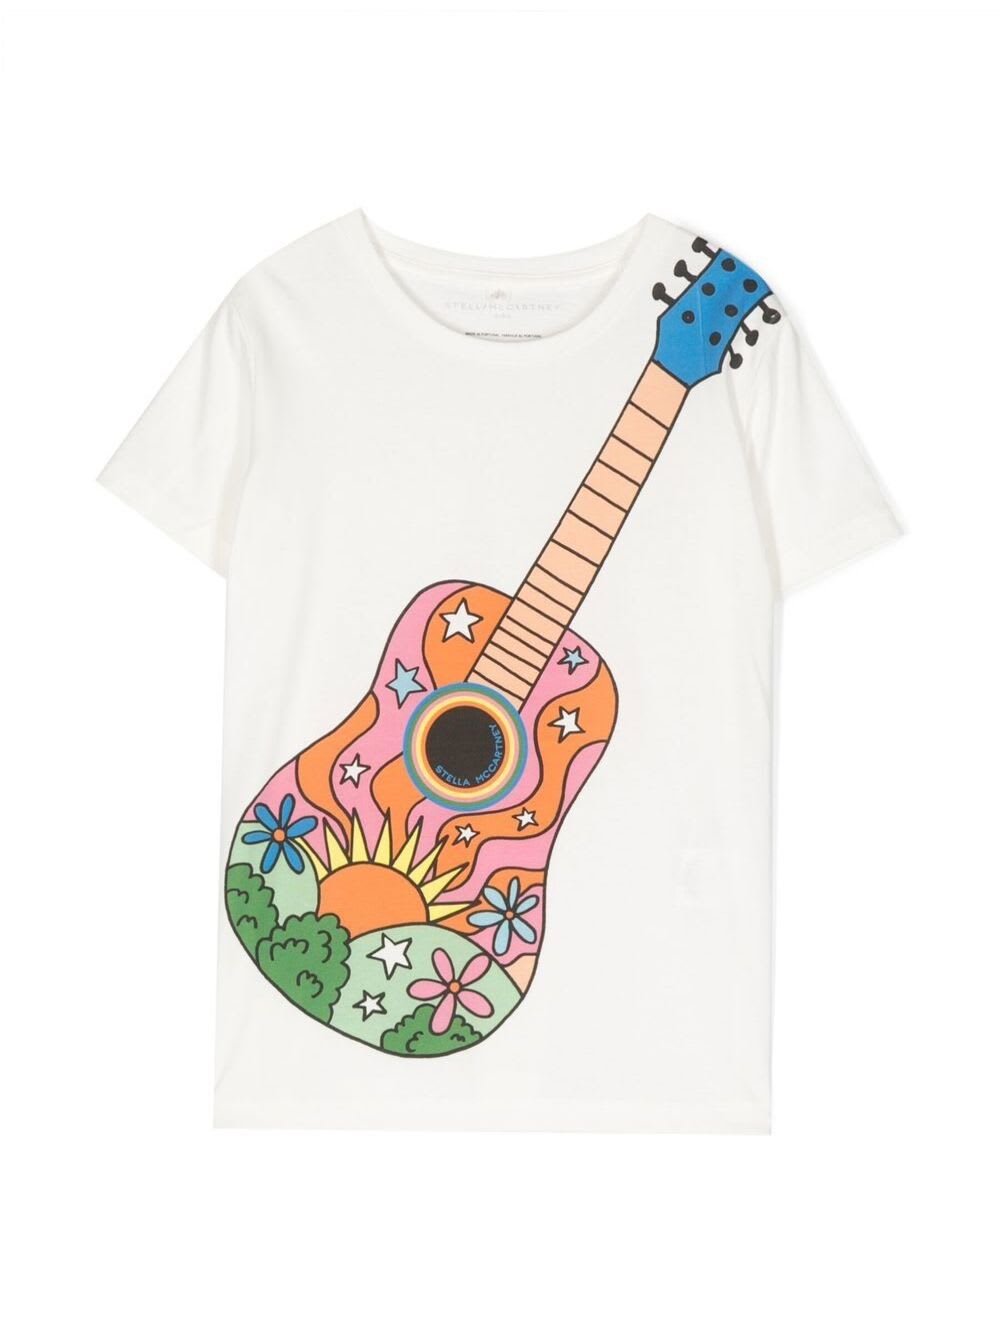 STELLA MCCARTNEY CREWNECK T-SHIRT WITH GUITARE PRINT IN WHITE COTTON WOMAN